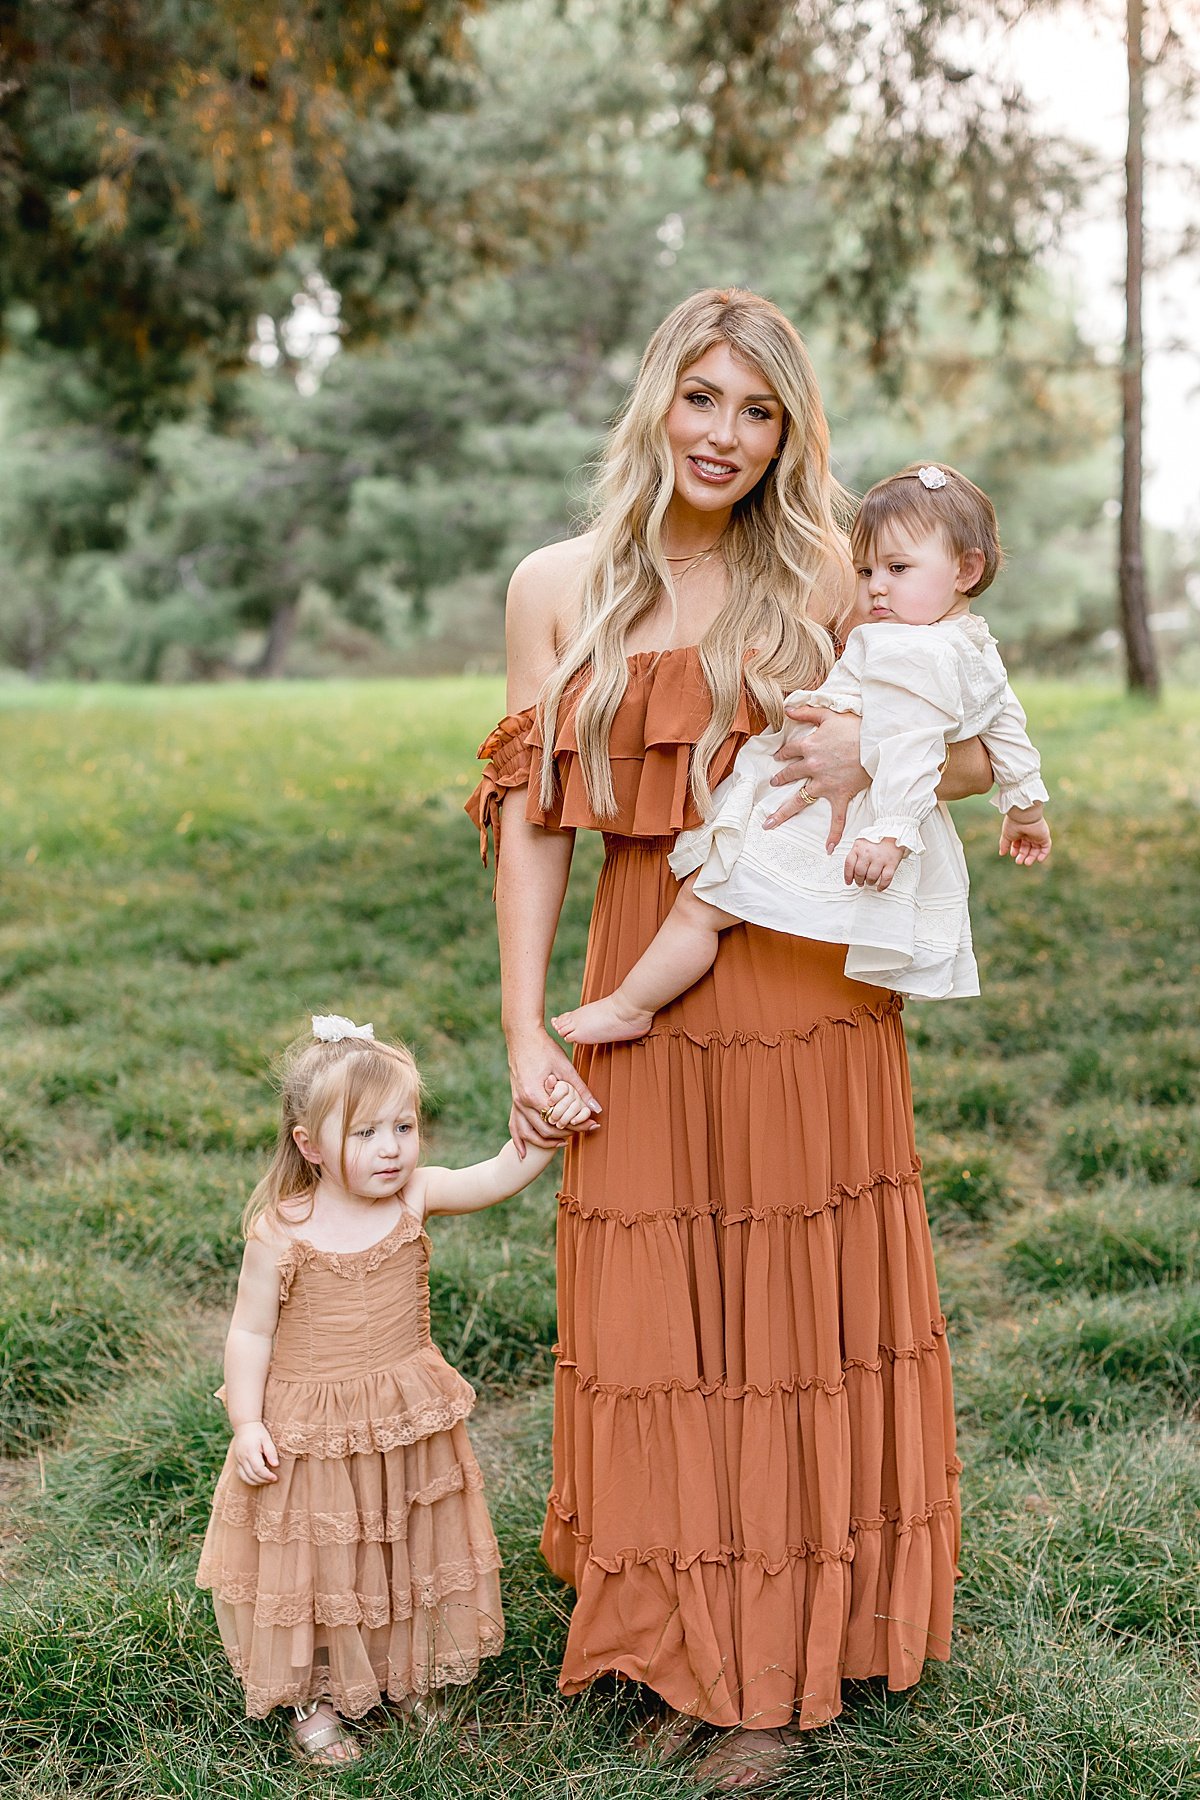 Beautiful mom with two daughters in Lake Forest California in Newport Beach. Fall portrait session with orange and autumn color dresses